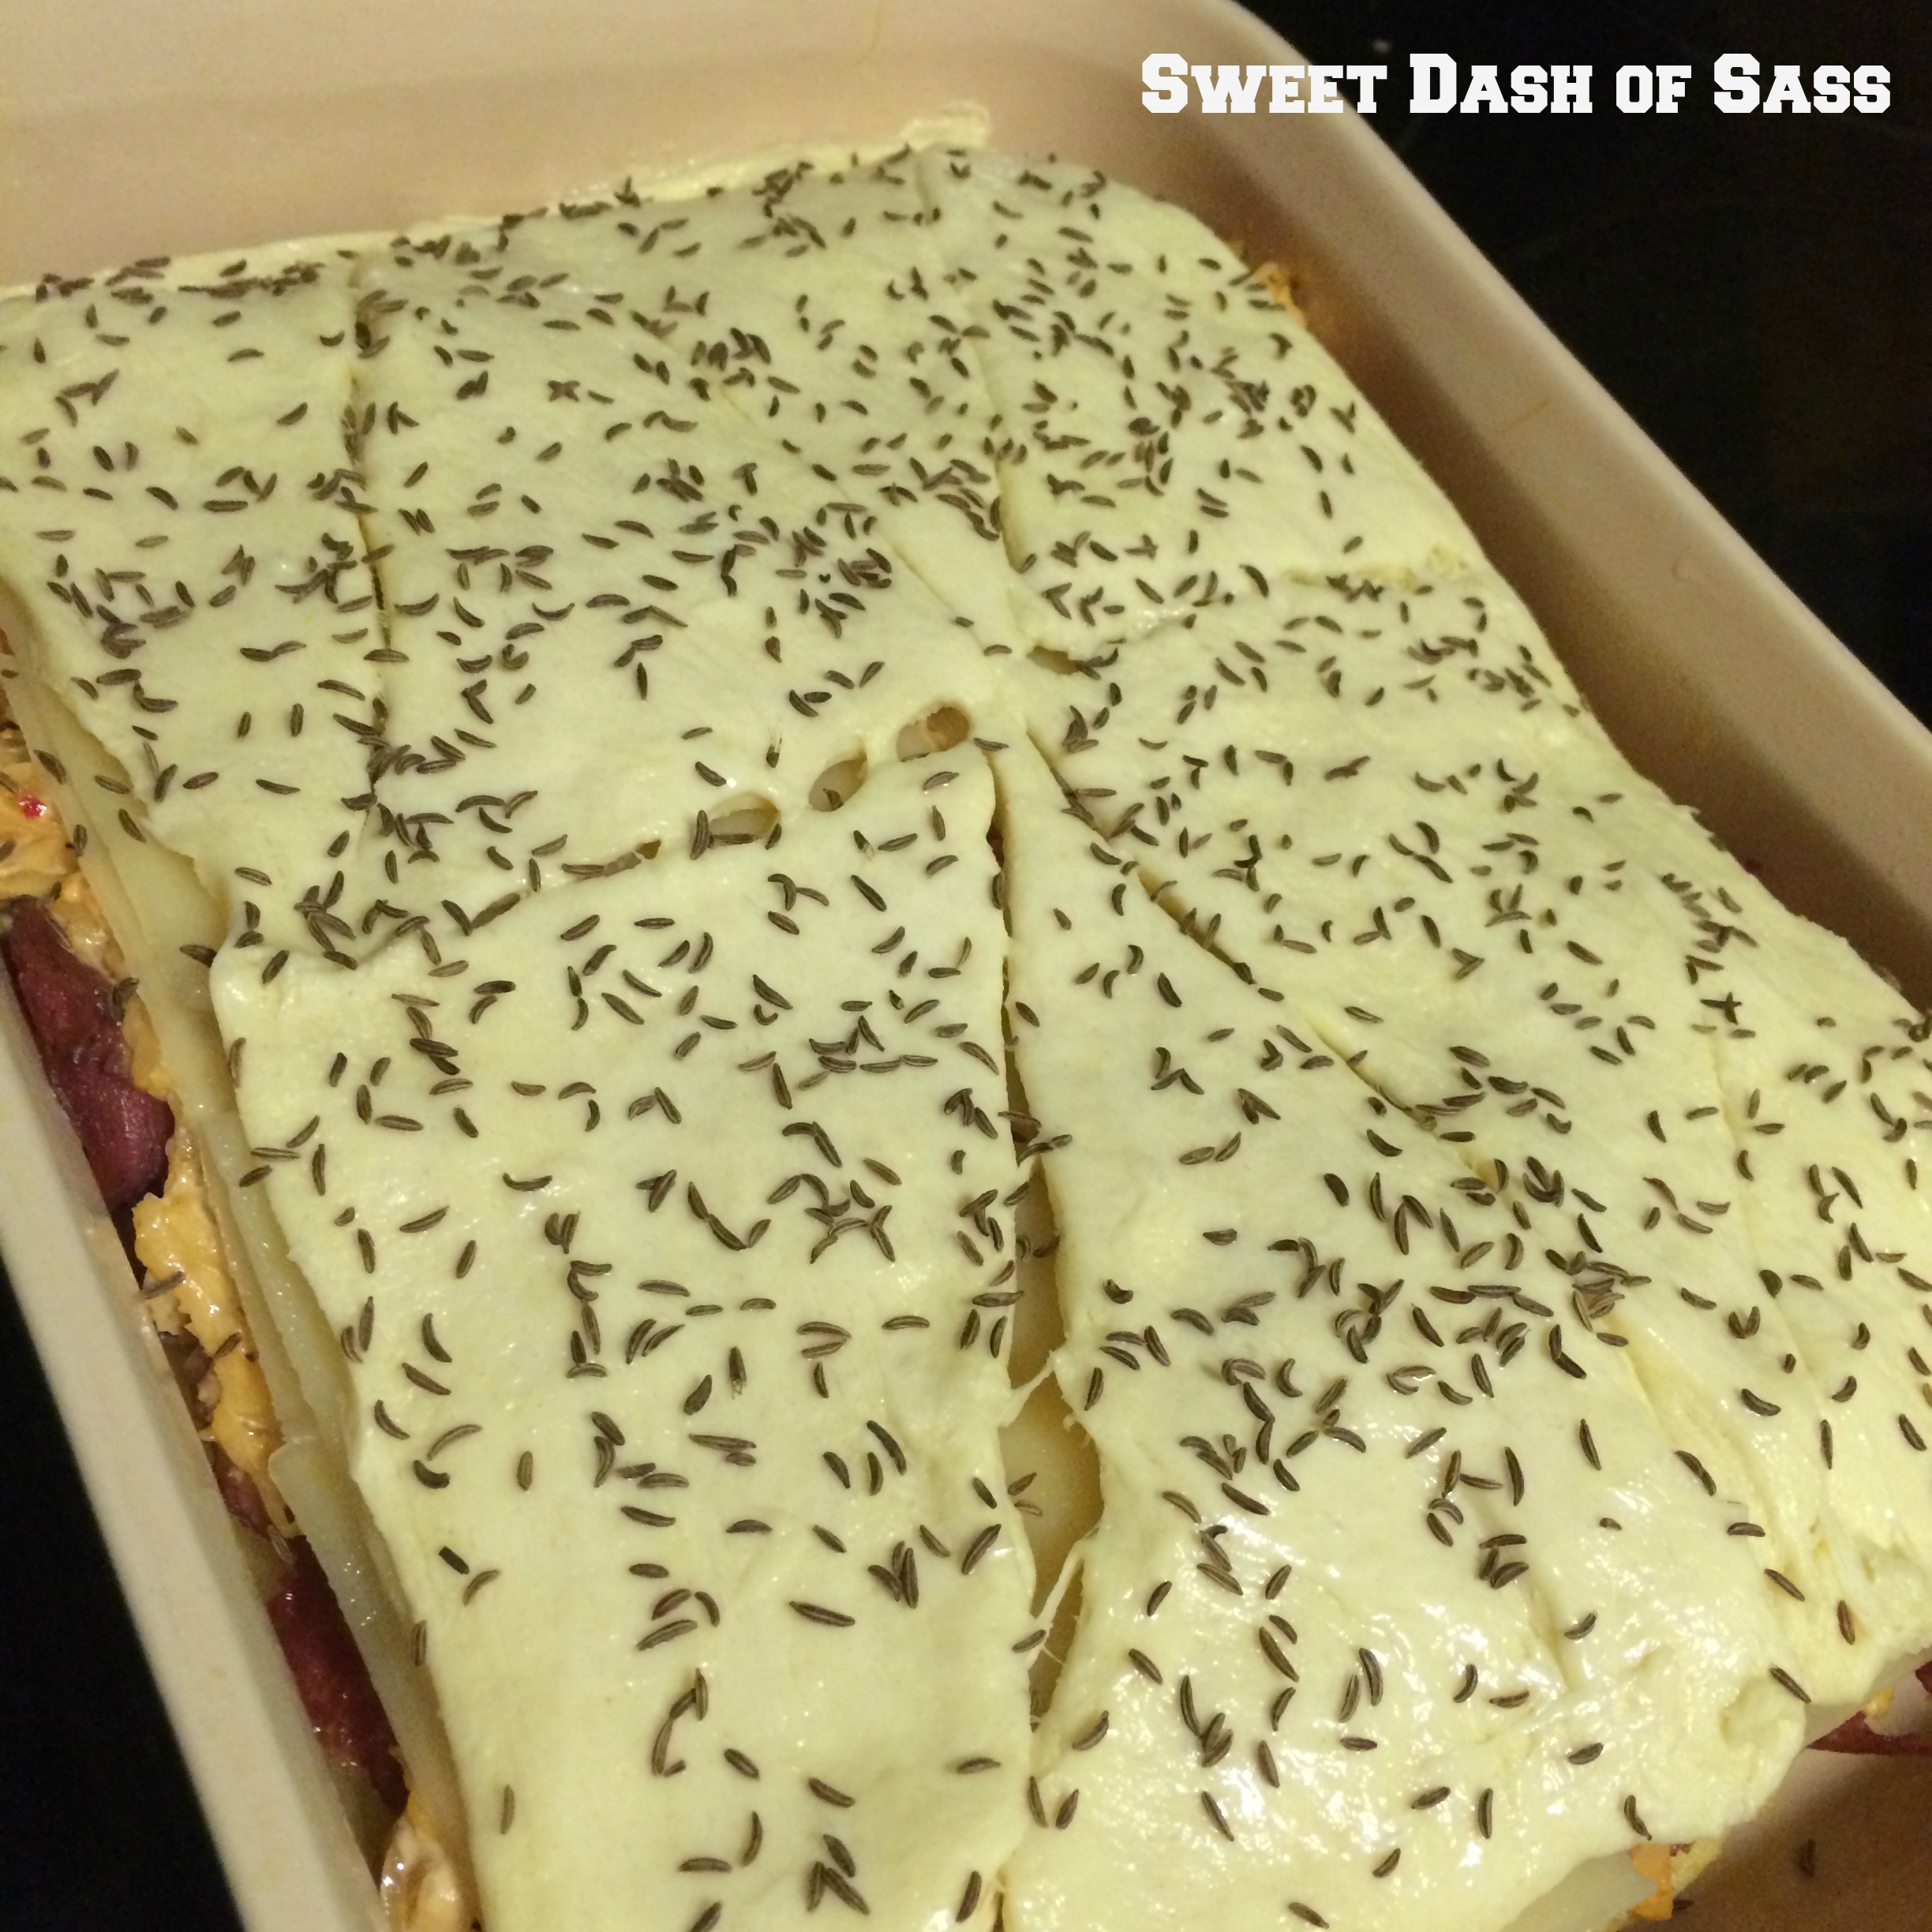 Reuben Crecent Sandwich Bake - www.SweetDashofSass.com  -- If you are a fan of Reubens, you will love this meal!!!